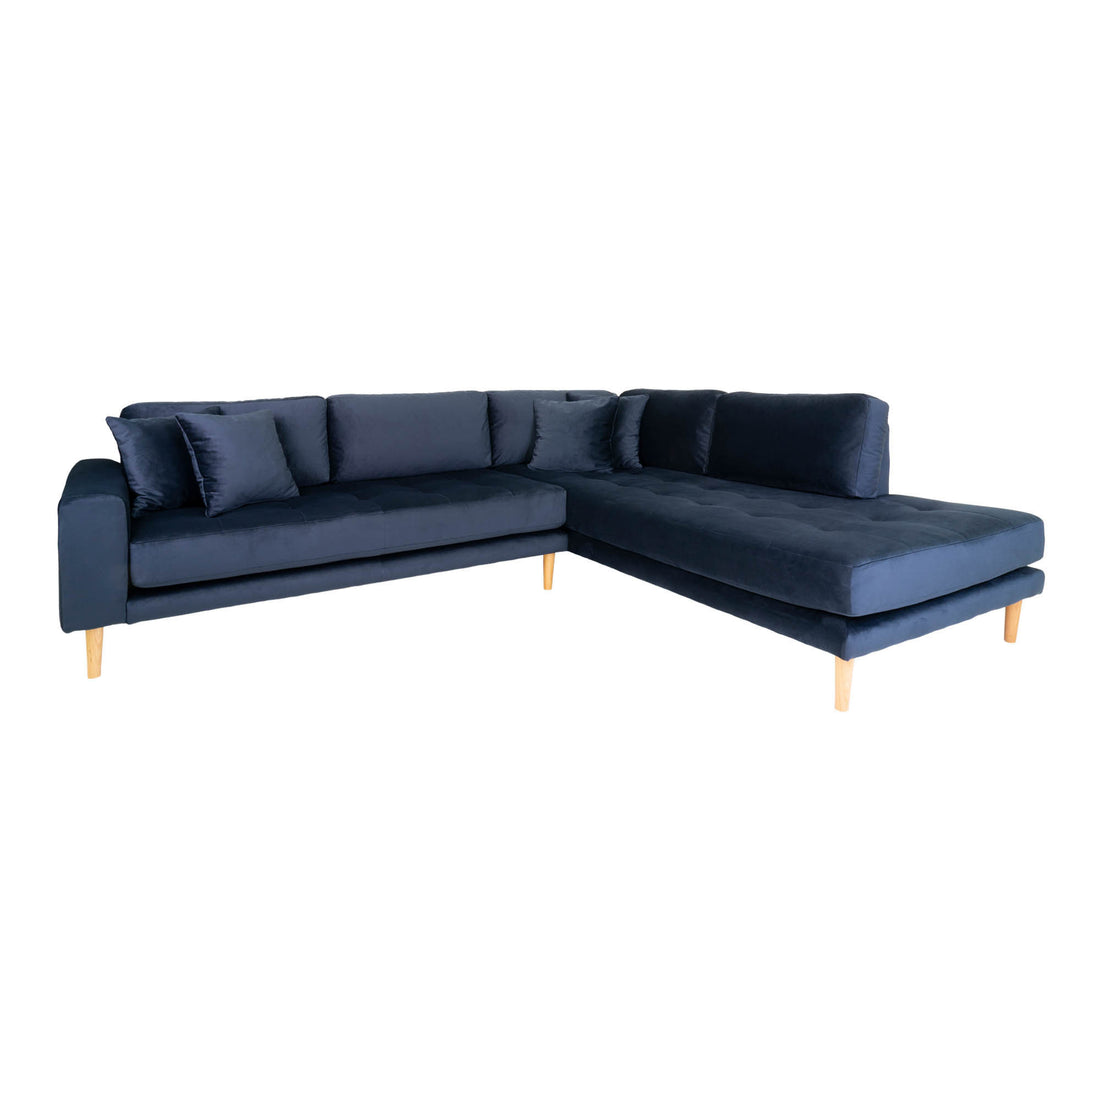 Lido Corner sofa Open End - Corner sofa Open end in velor, right -wing in blue with four pillows and nature wooden legs, HN1005 - 1 - pcs